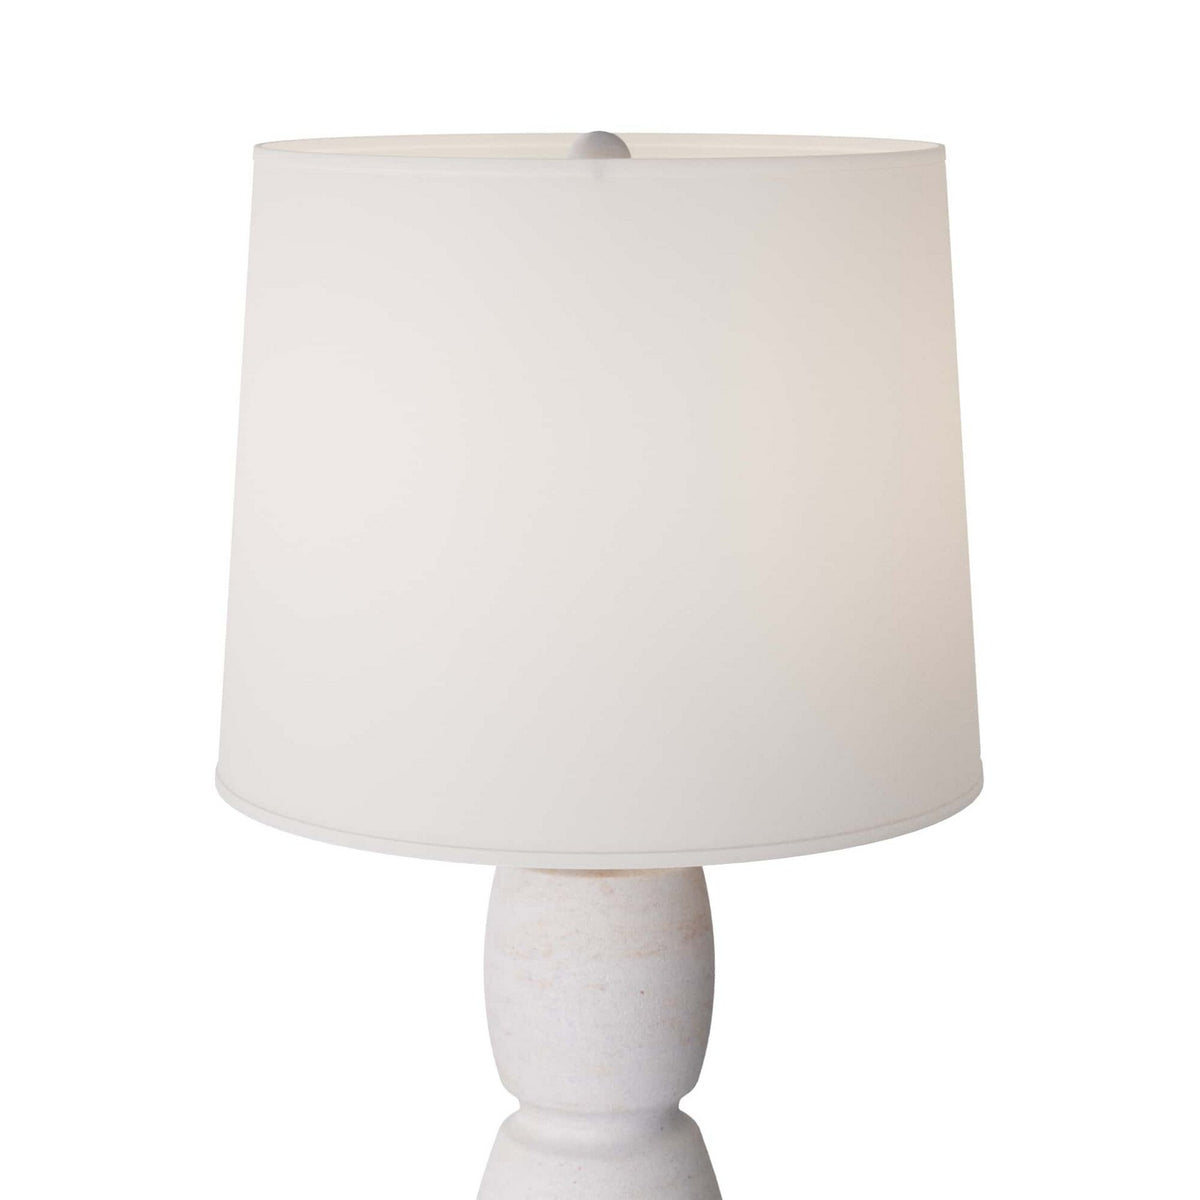 Werlow Table Lamp